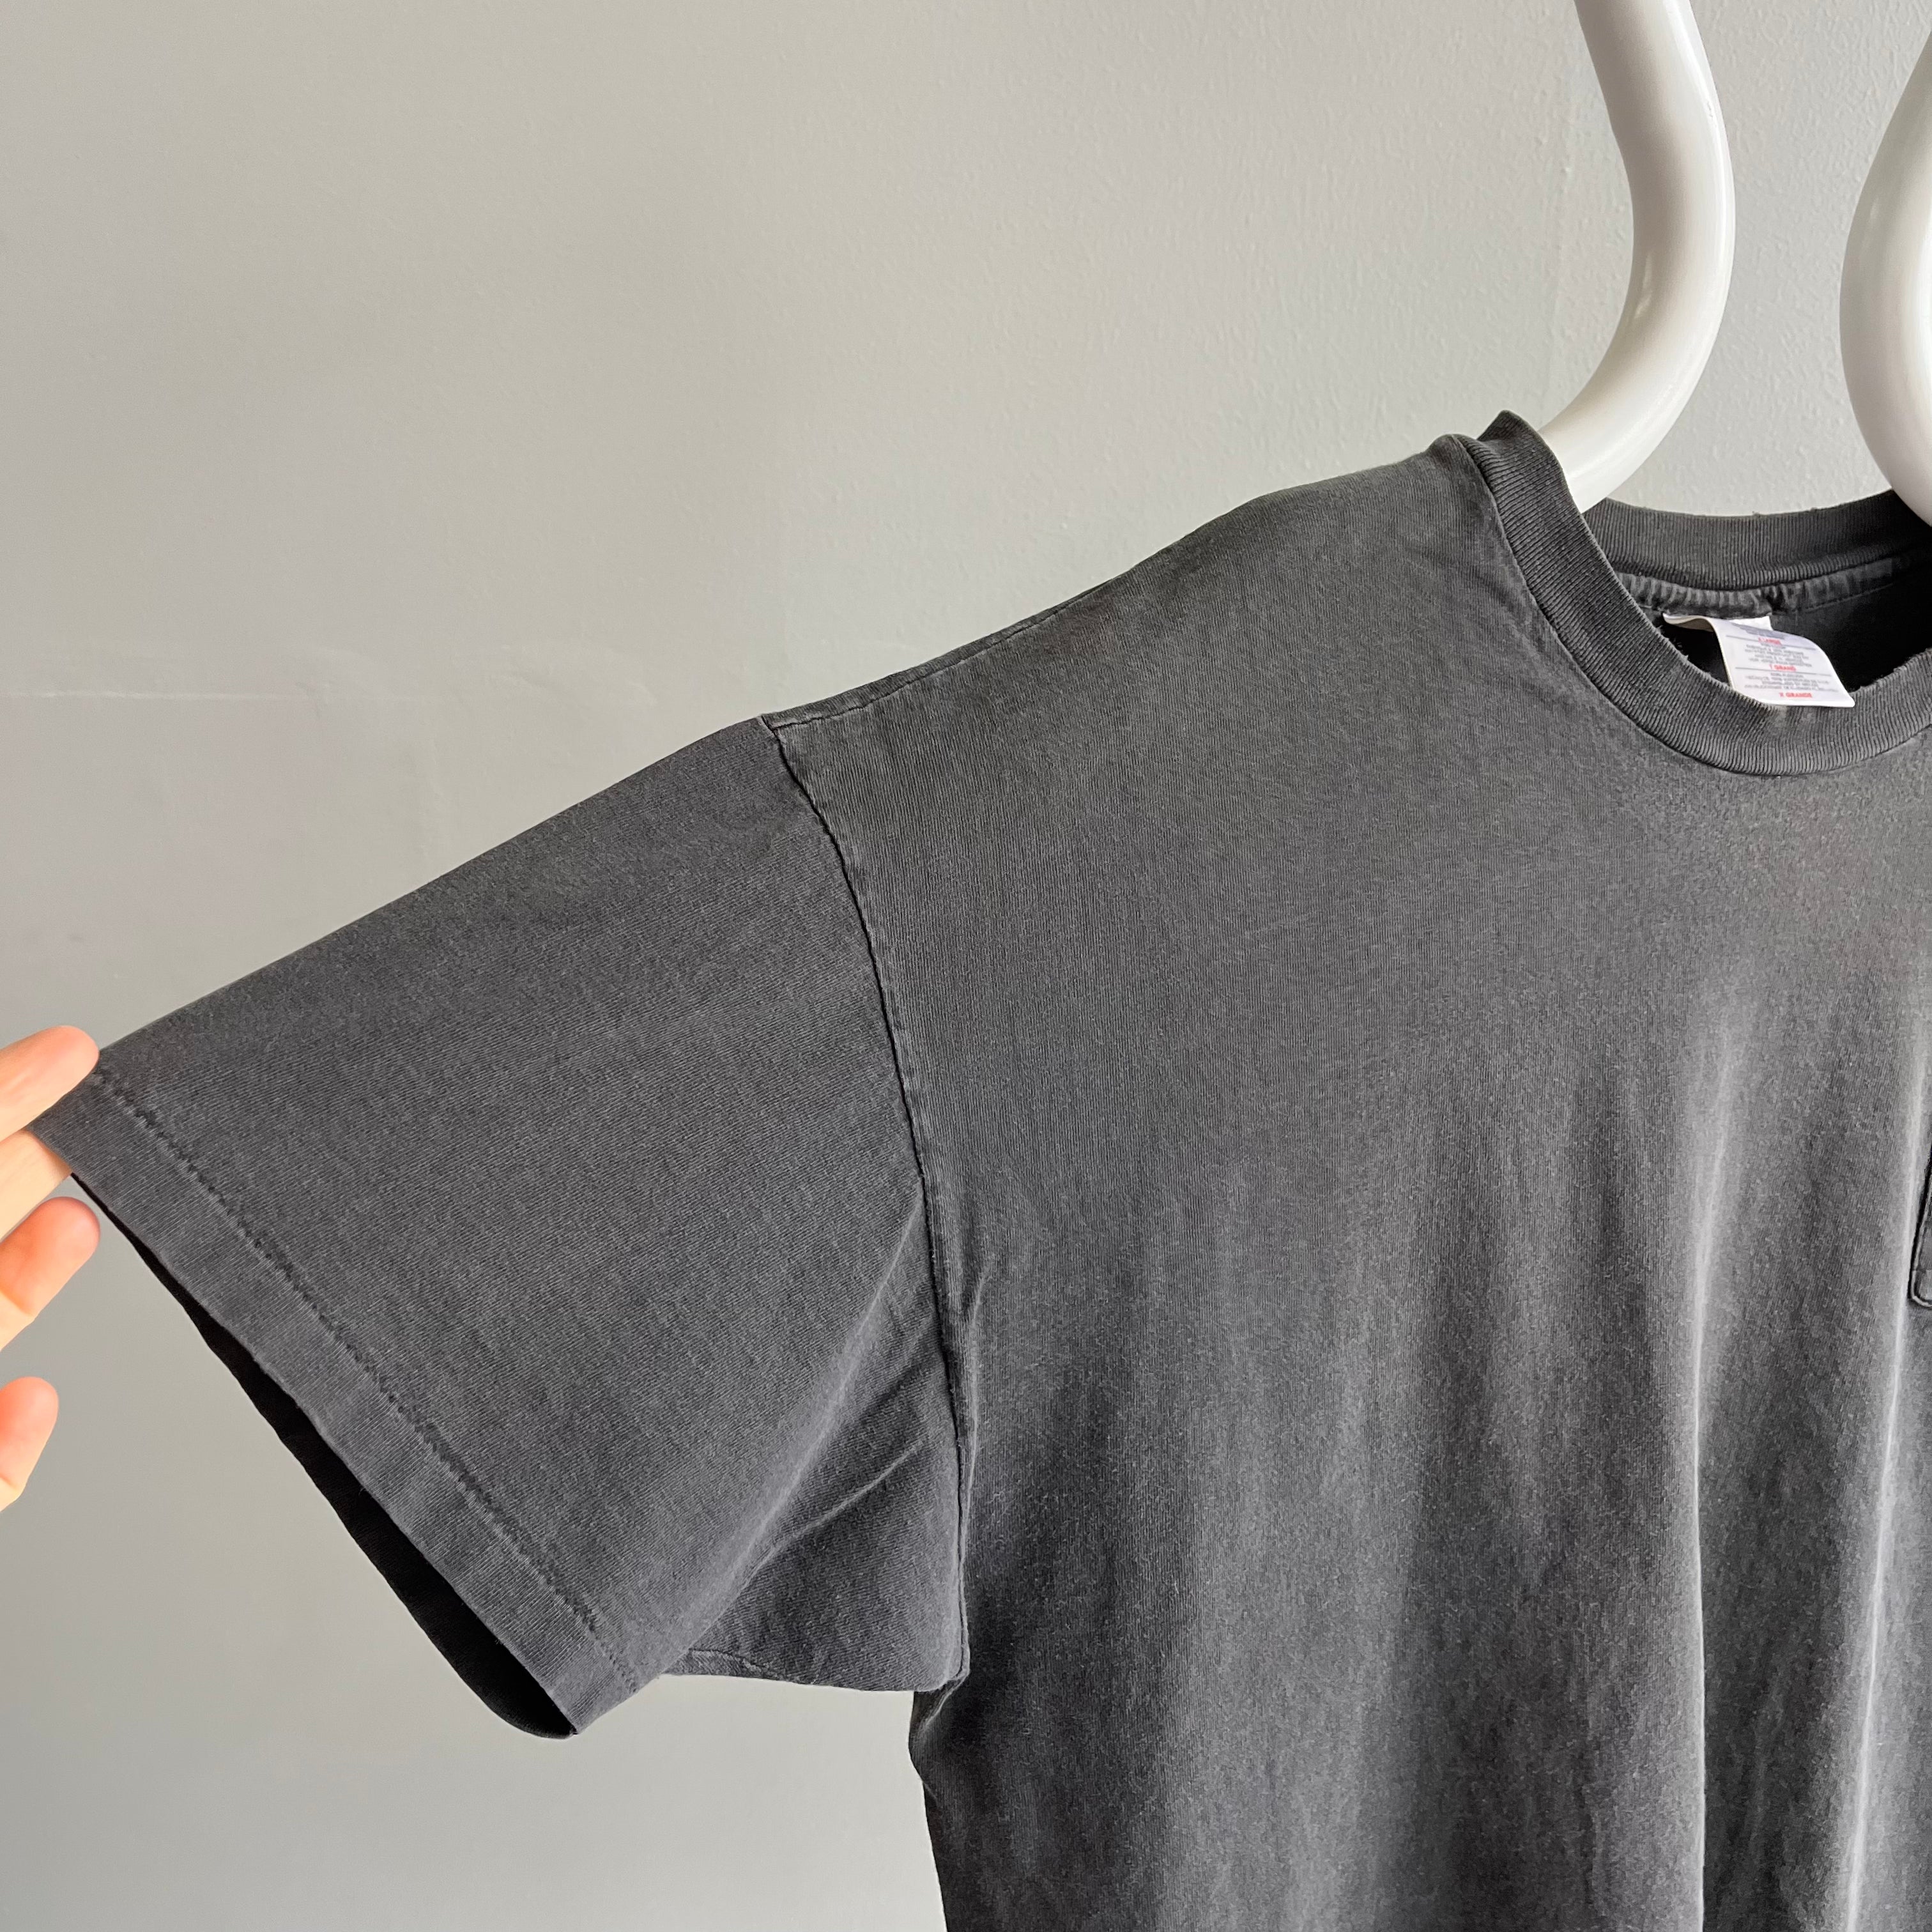 1990s Faded and Worn Boxy Blank Black Pocket T-Shirt